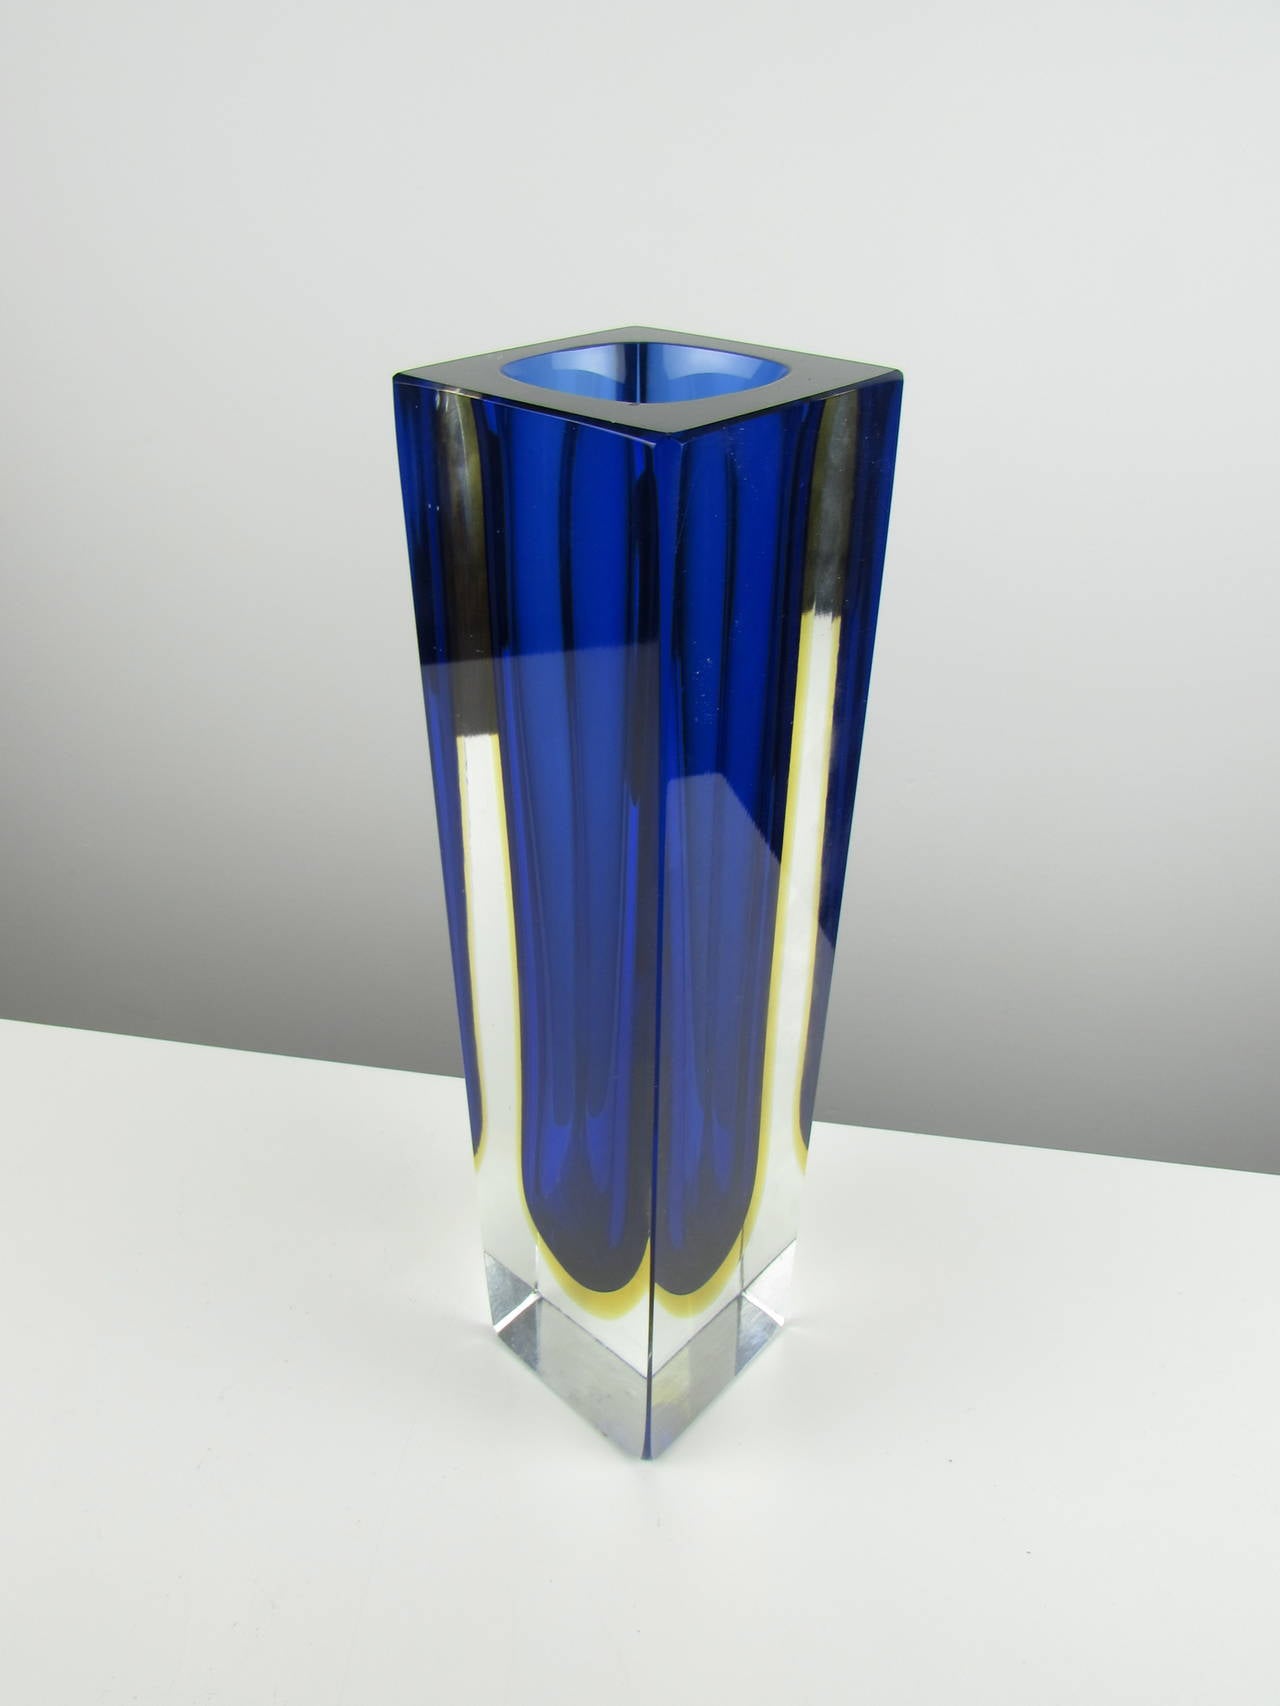 Massive rectangular Sommerso Murano vase with cobalt and yellow center. This example of Sommerso glass is one of the largest we have seen, standing at 12 inches tall. The colors are vibrant and mesmerizing. Condition is excellent.

We offer free